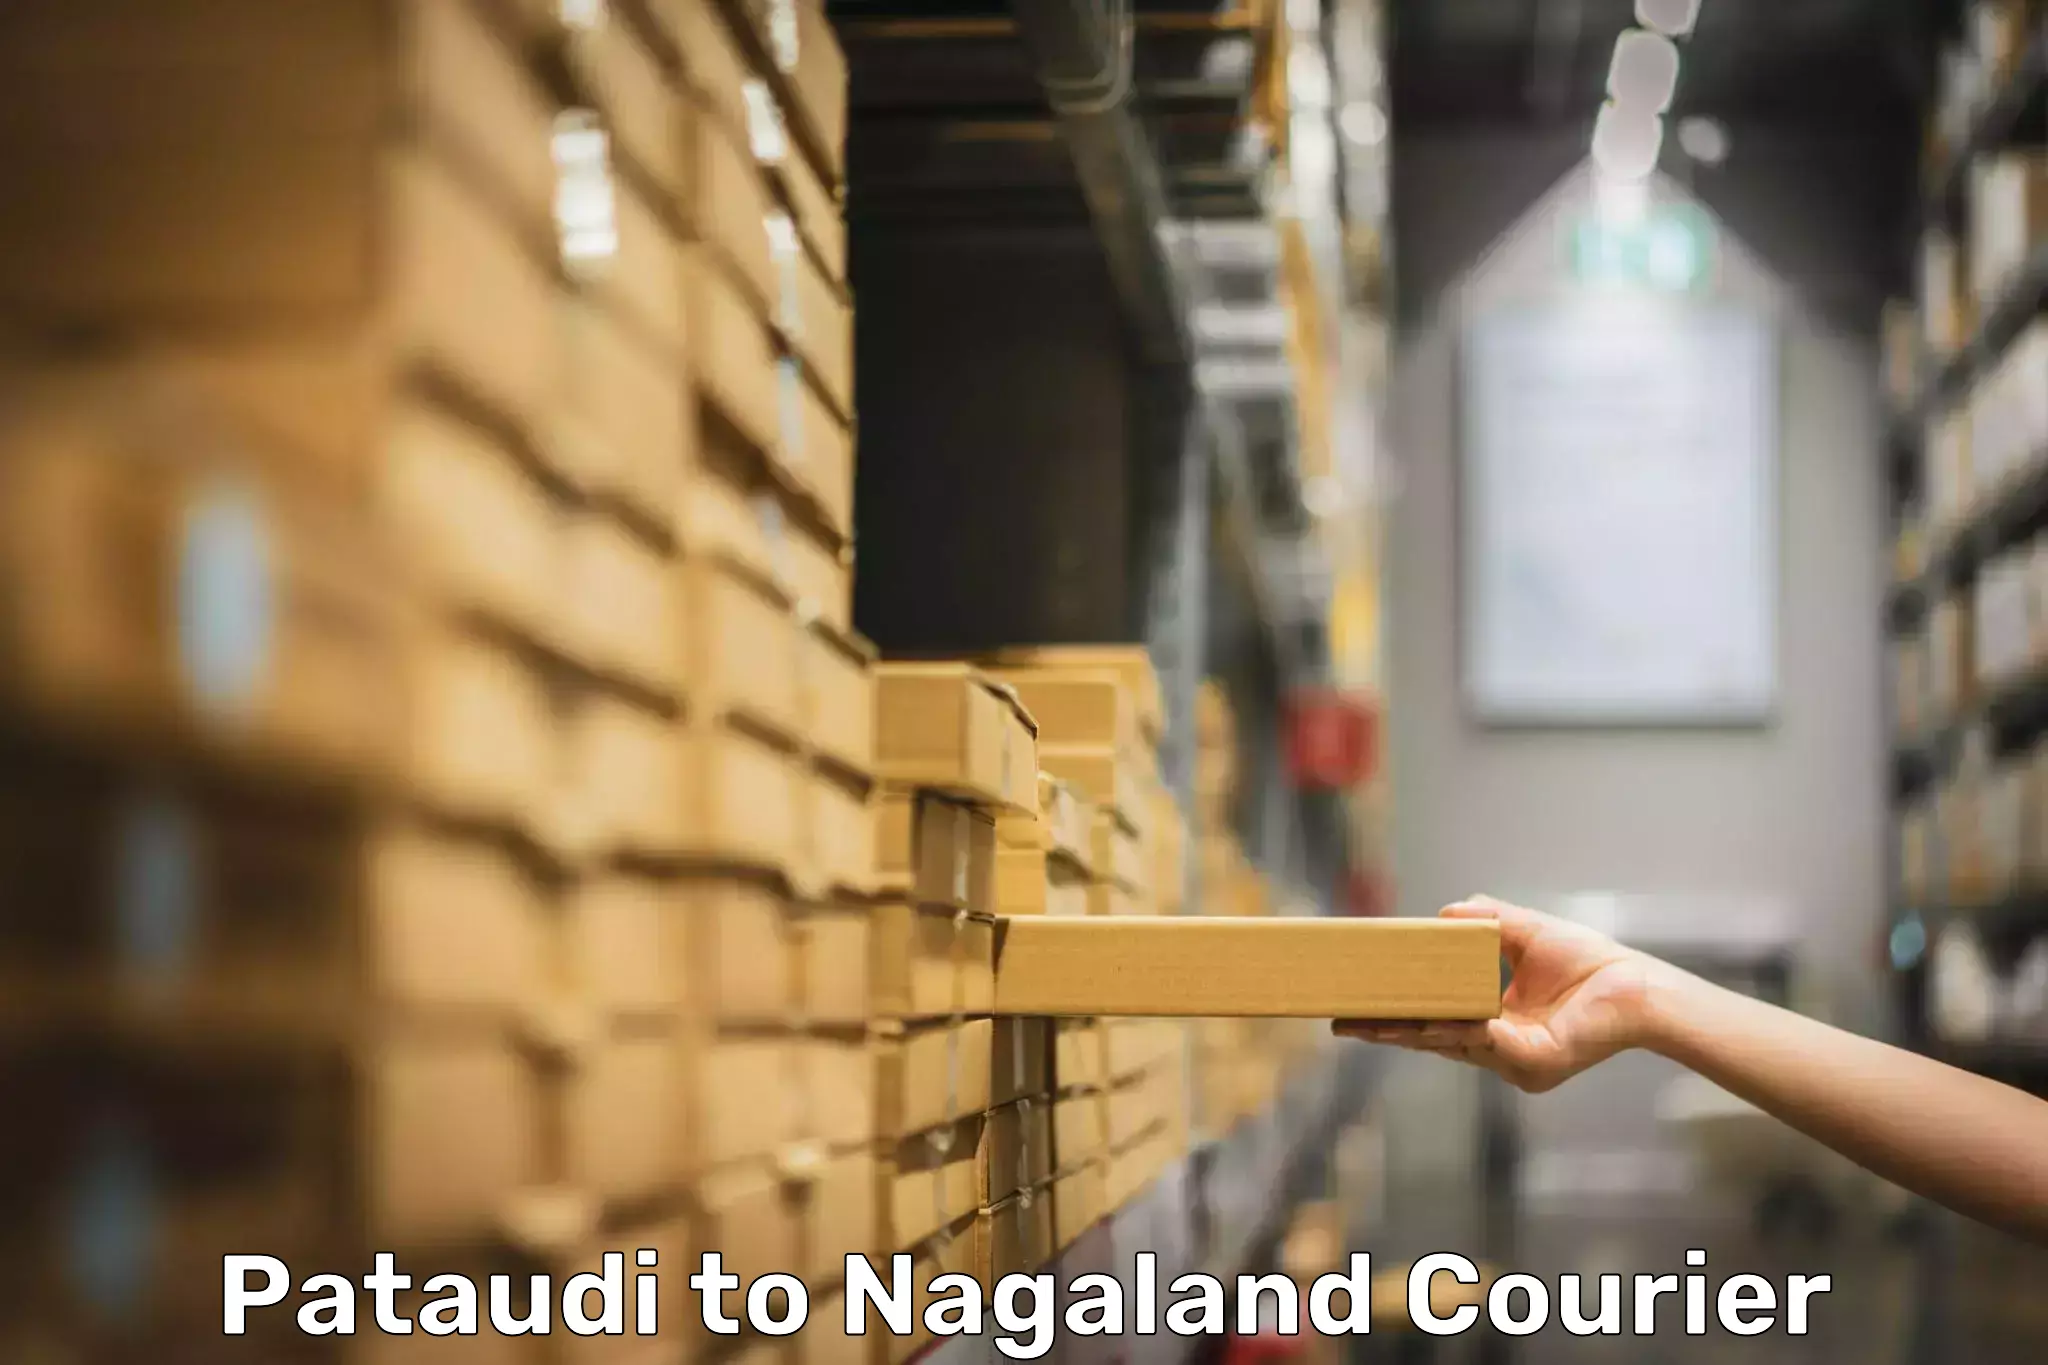 Luggage transport consultancy Pataudi to Nagaland